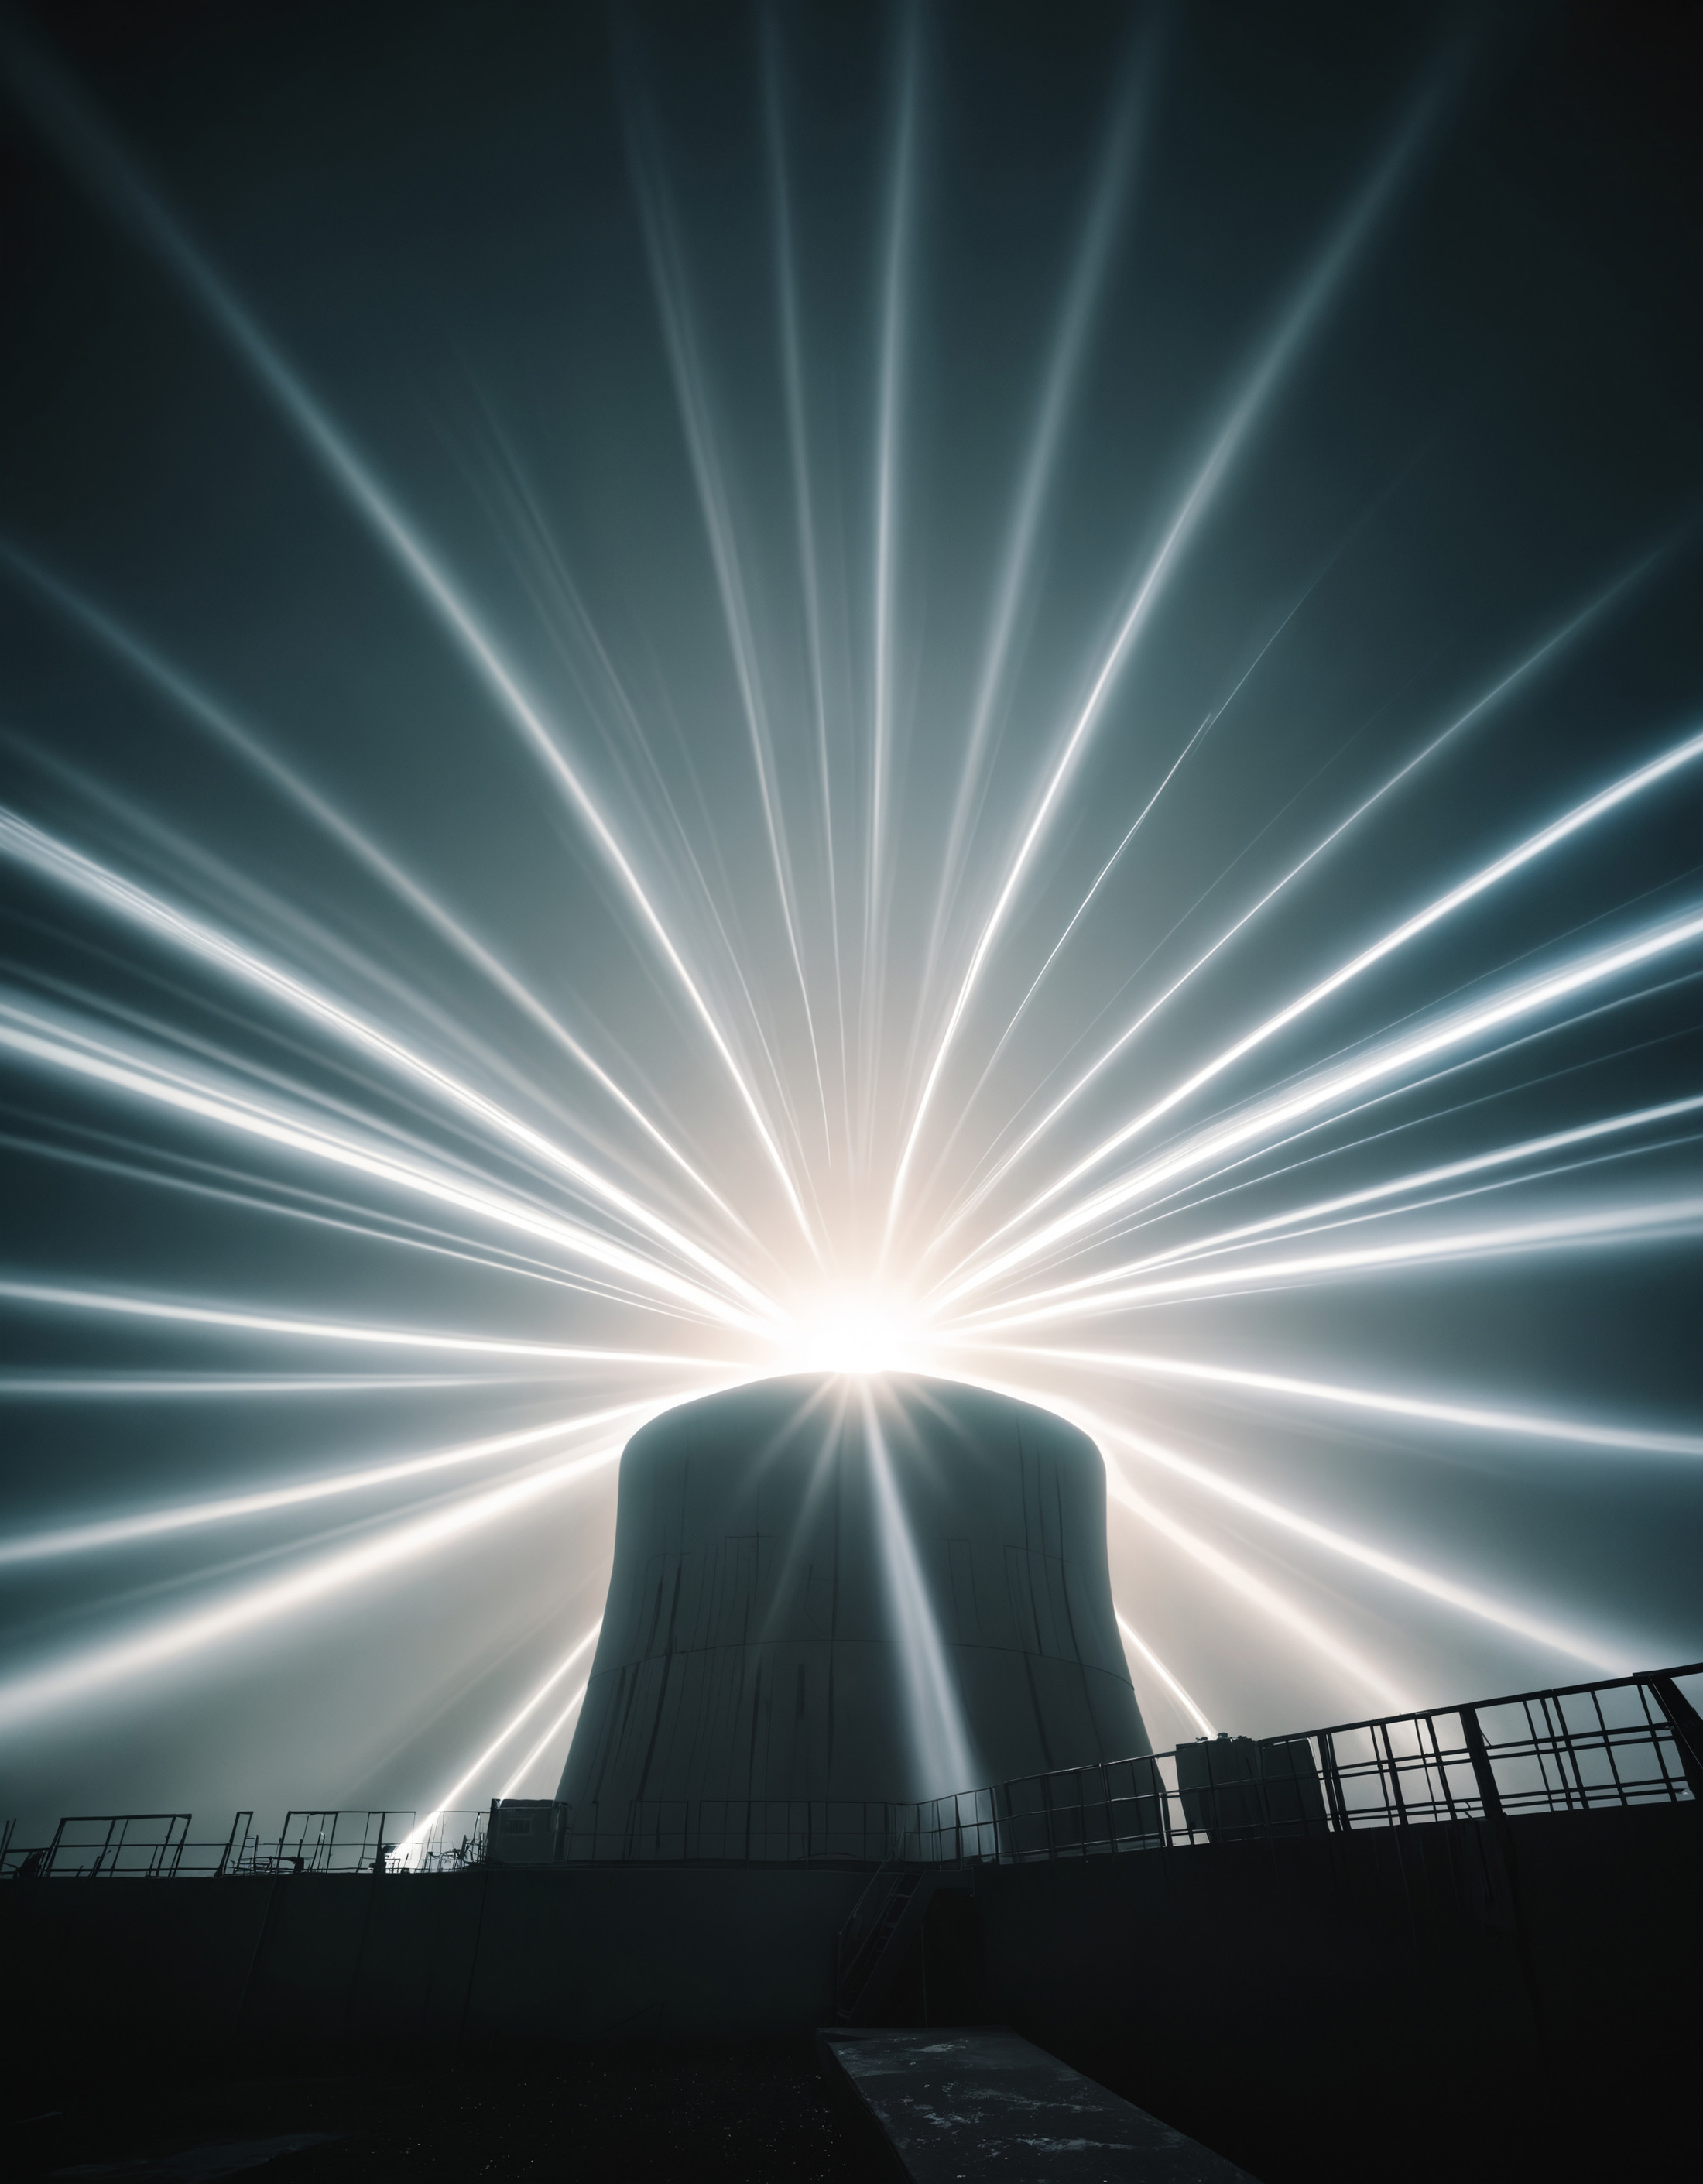 award winning photo of an nuclear criticality shooting rays of incredibly bright light in a nuclear reactor, Cherenkov rad...